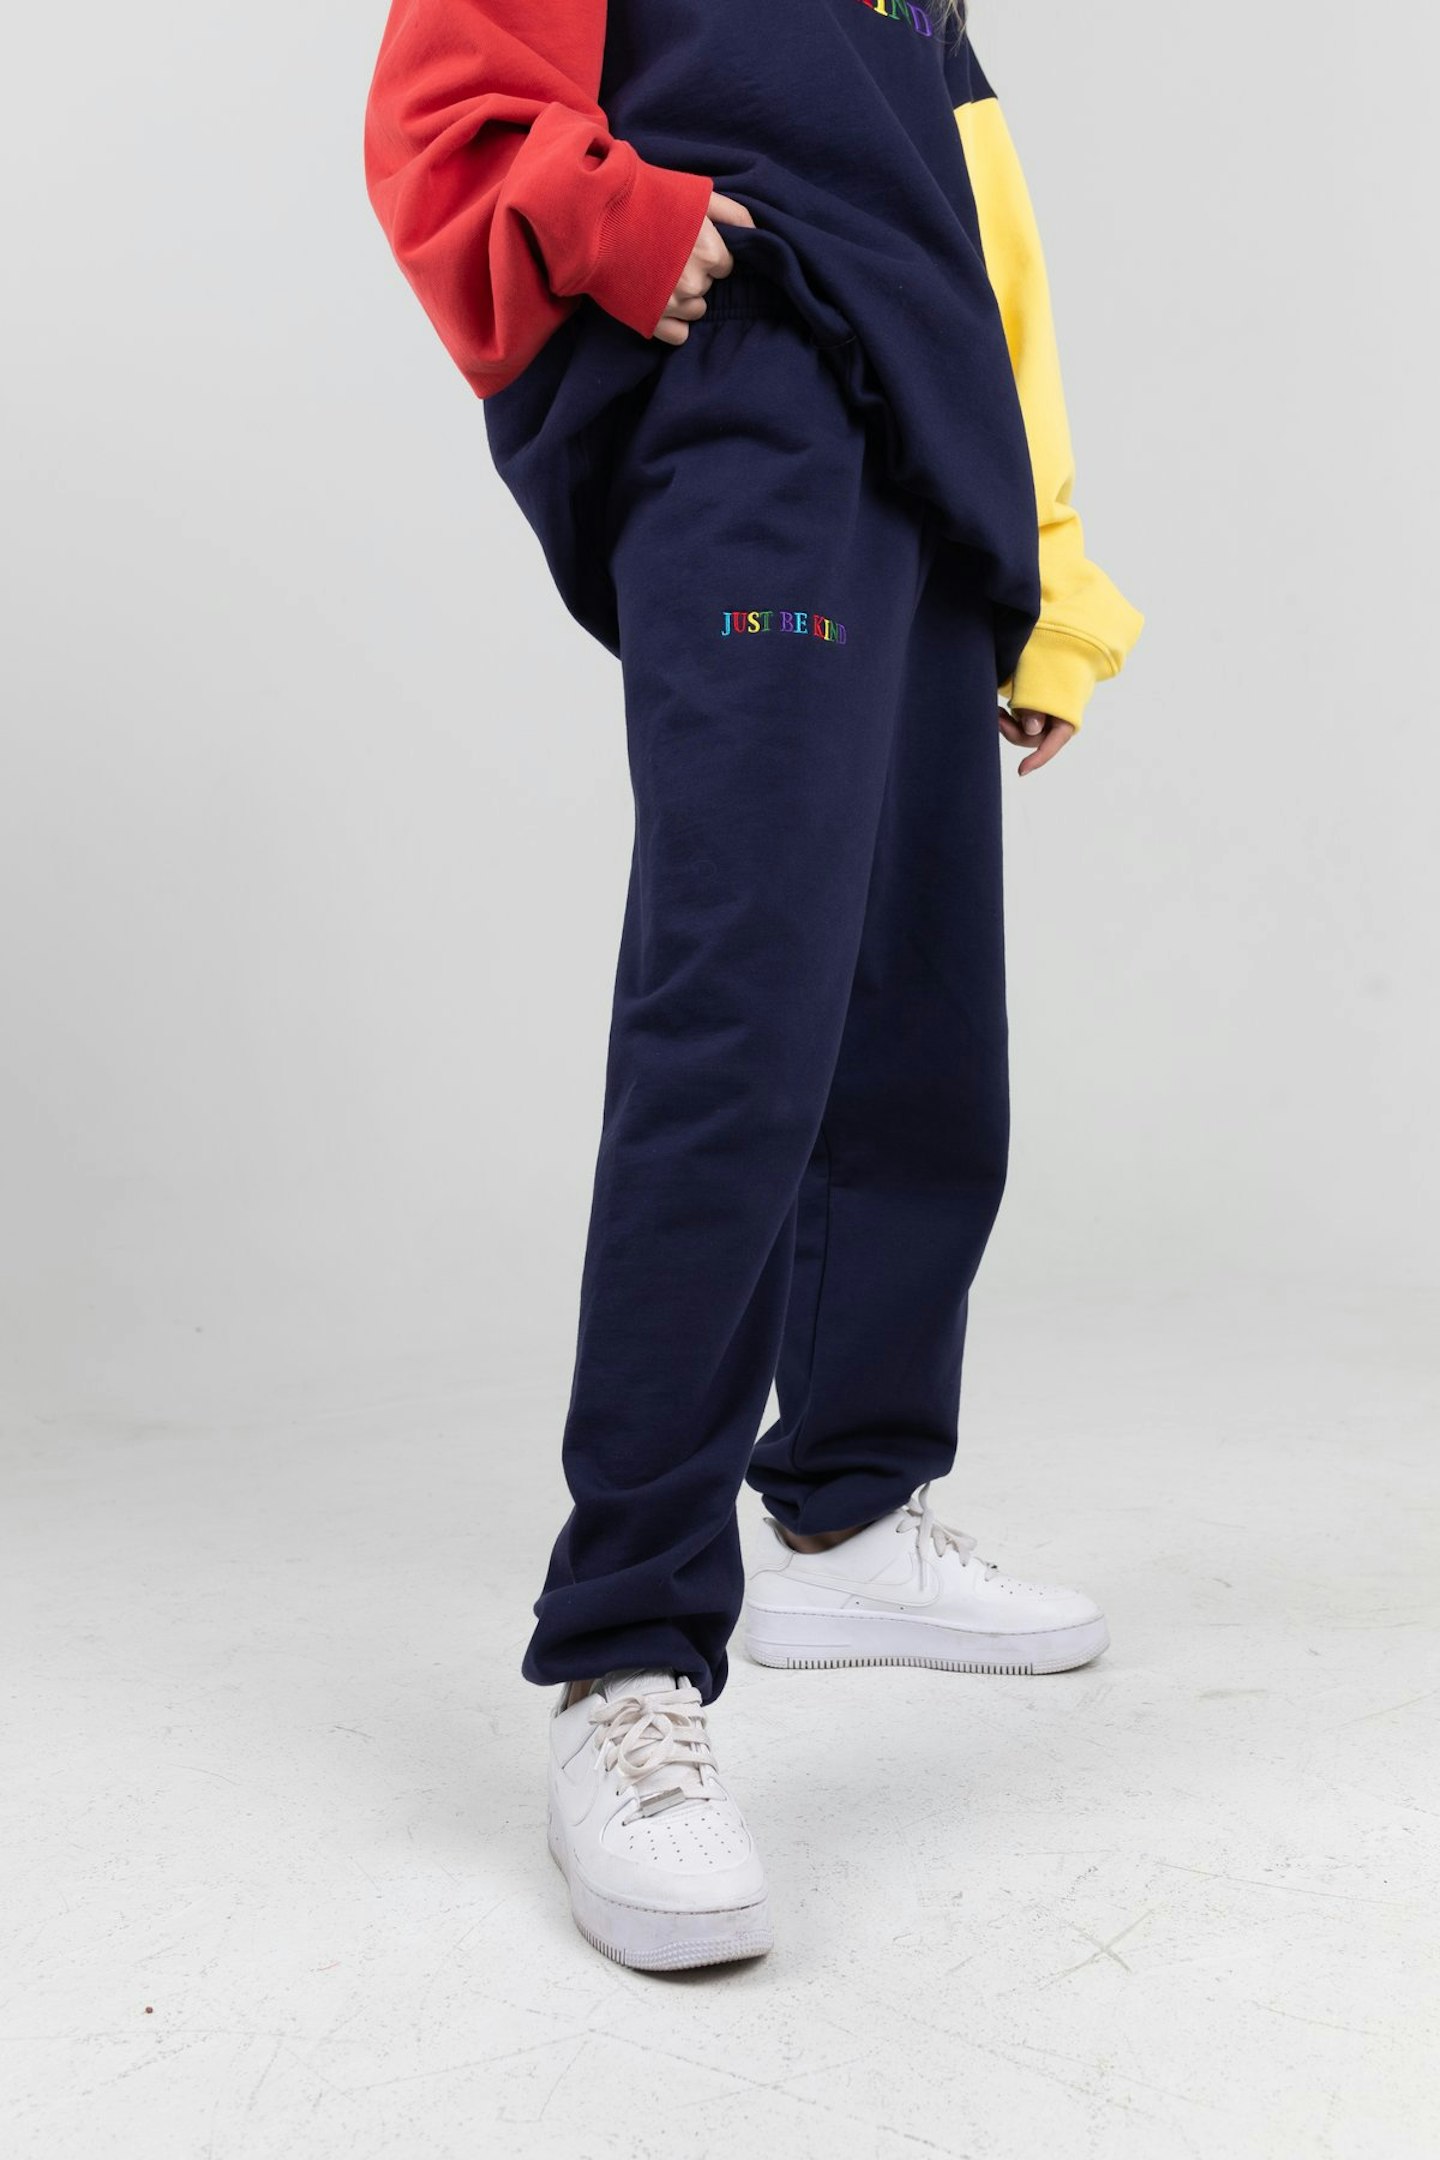 The Mayfair Group, Just Be Kind Navy Sweatpants, £65